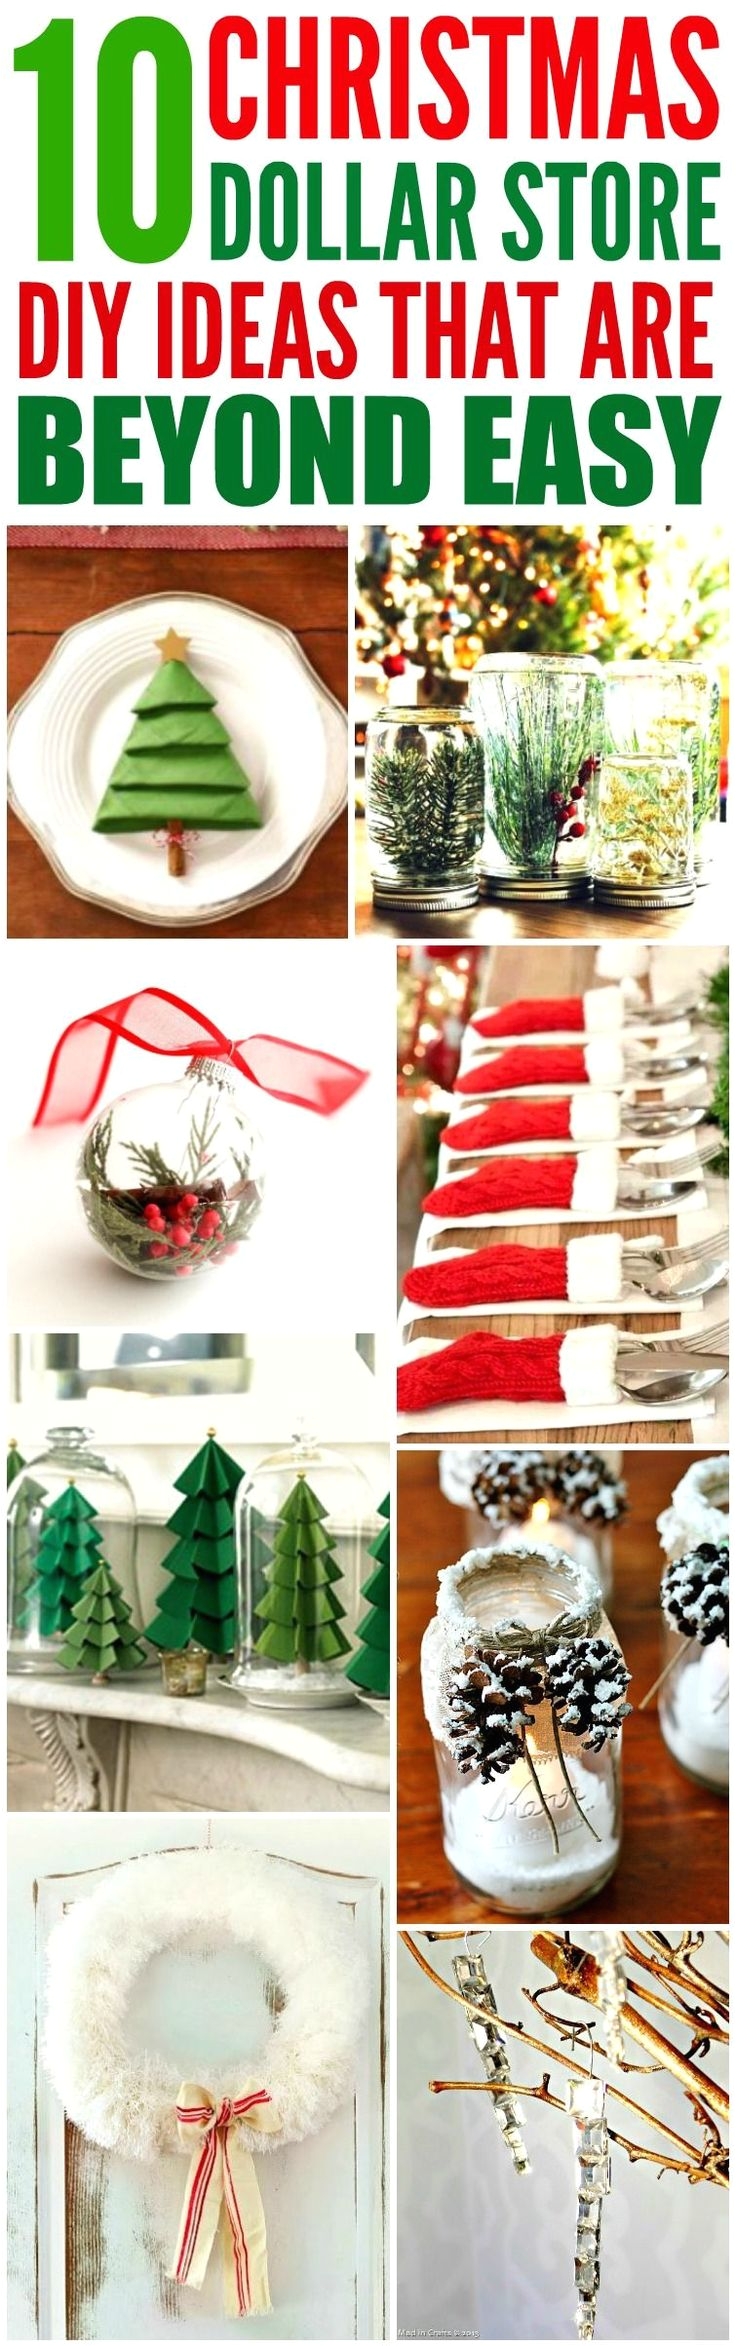 10 dollar store diy christmas decorations that are beyond easy